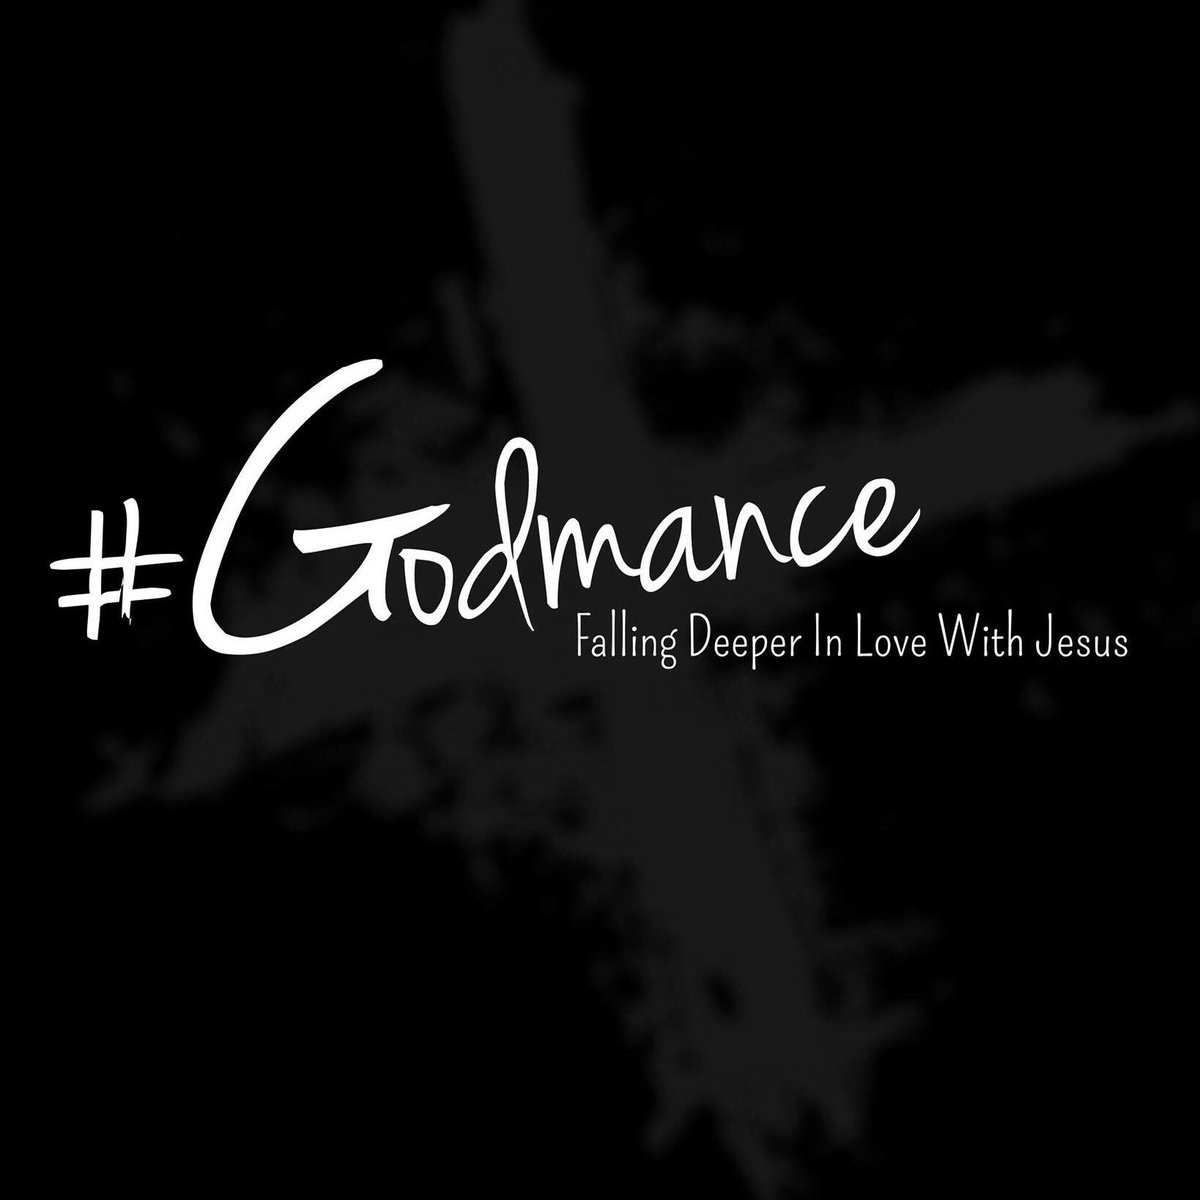 Hey peeps ... do me a favor and like my blog page @ Facebook.com/Godmance !  #appreciated #spiritualencouragement #inspire #beingreal #speaktruth #relationshipwithjesus #christianity #bible #faithblog